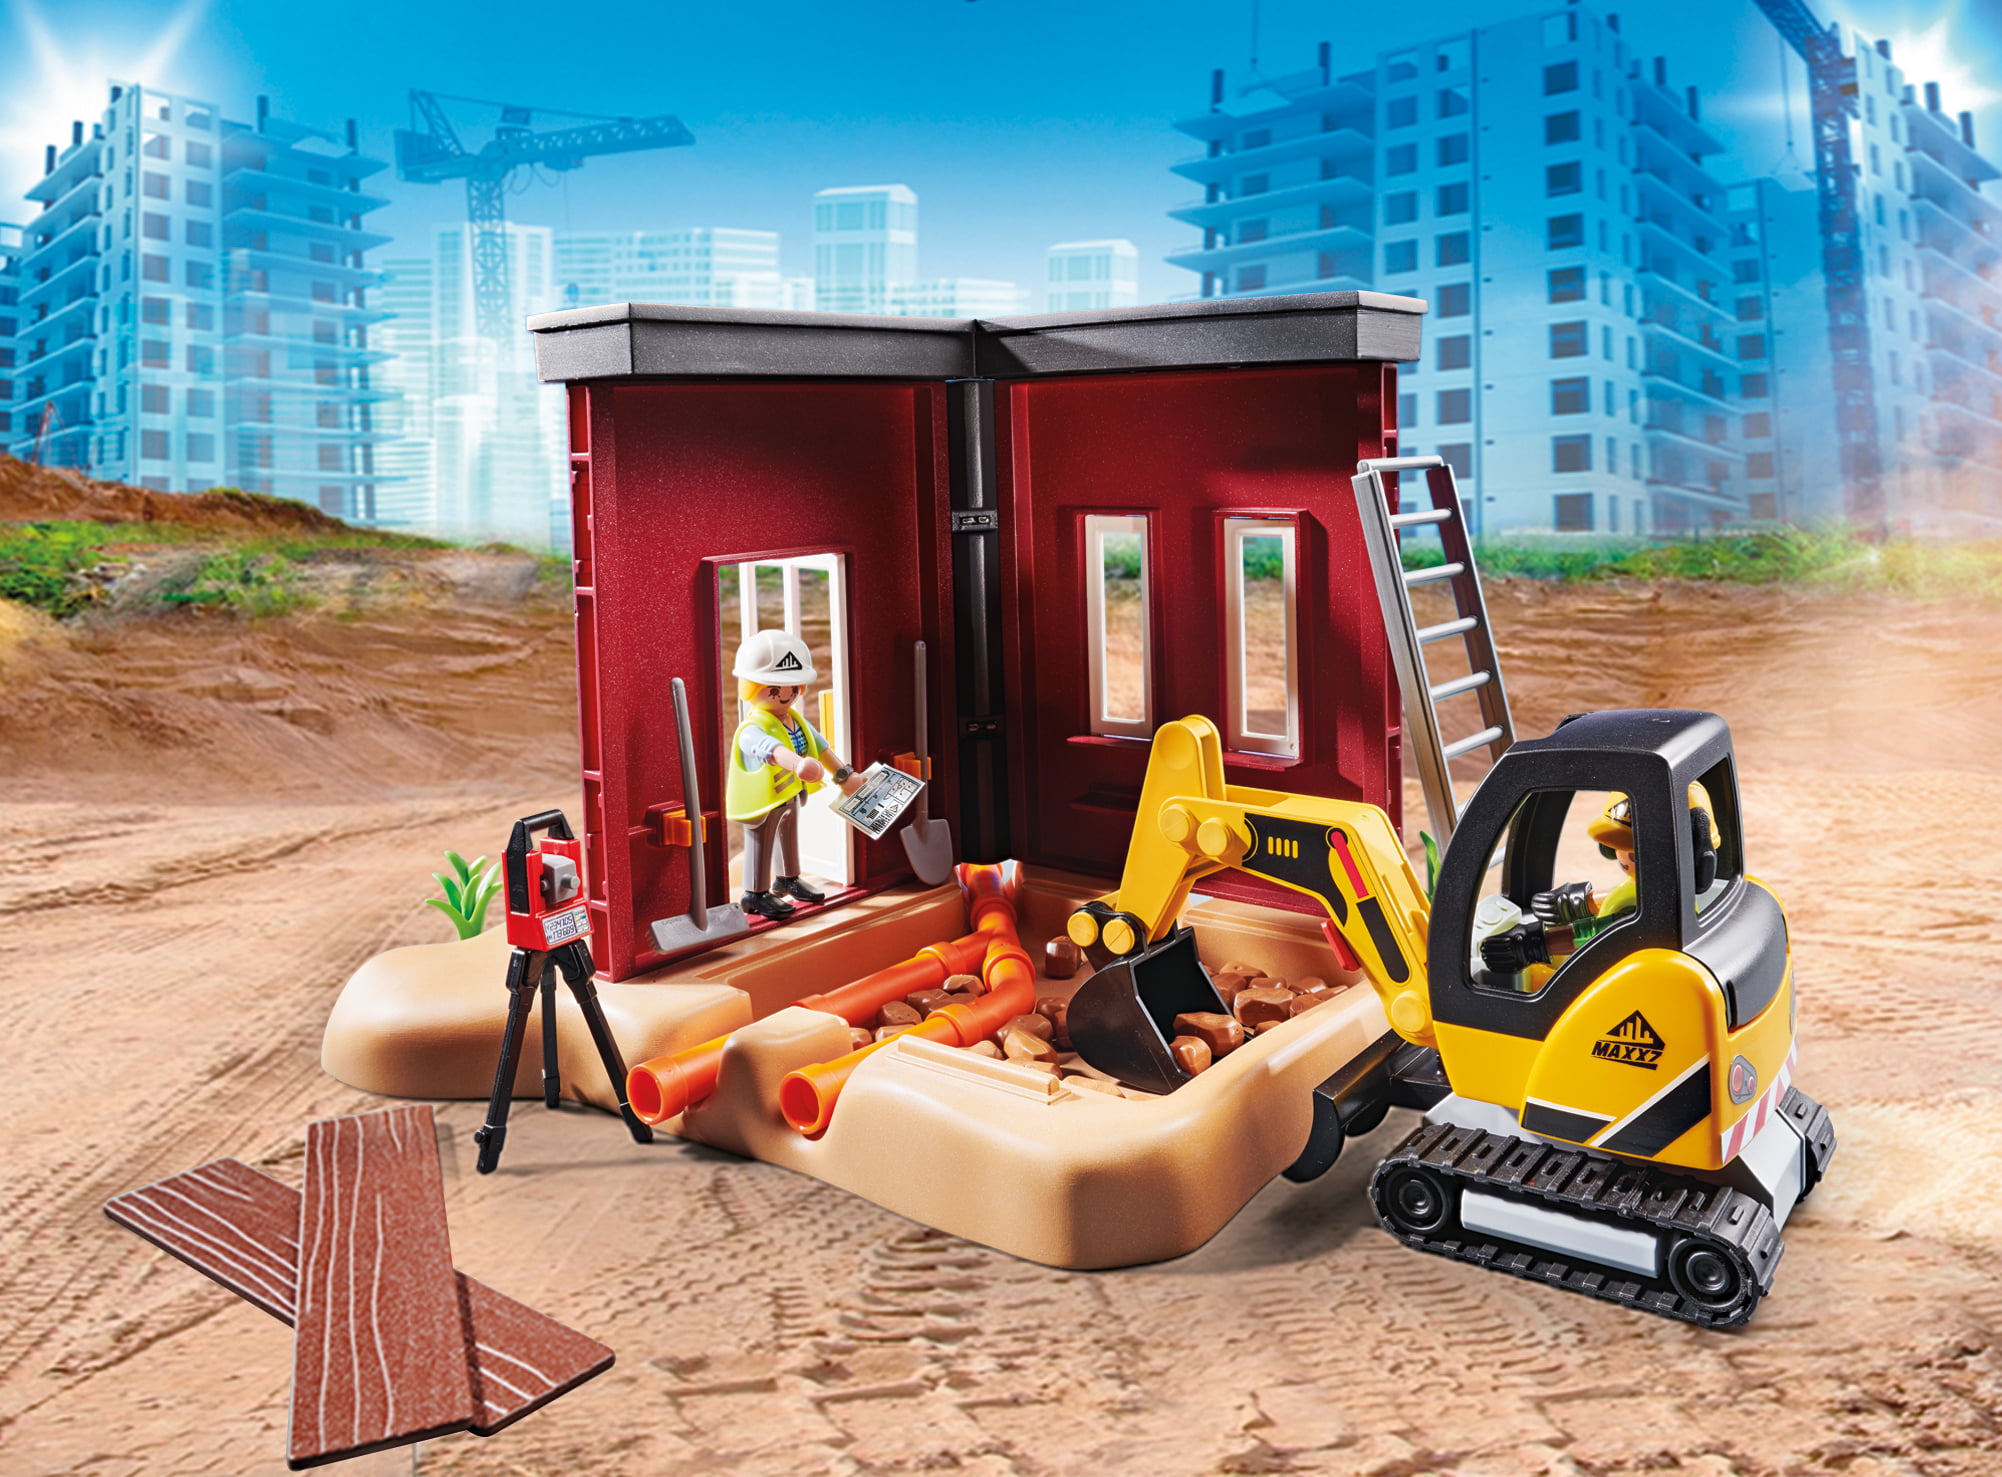 Lick lexicon As PLAYMOBIL Mini Excavator with Building Section - Walmart.com